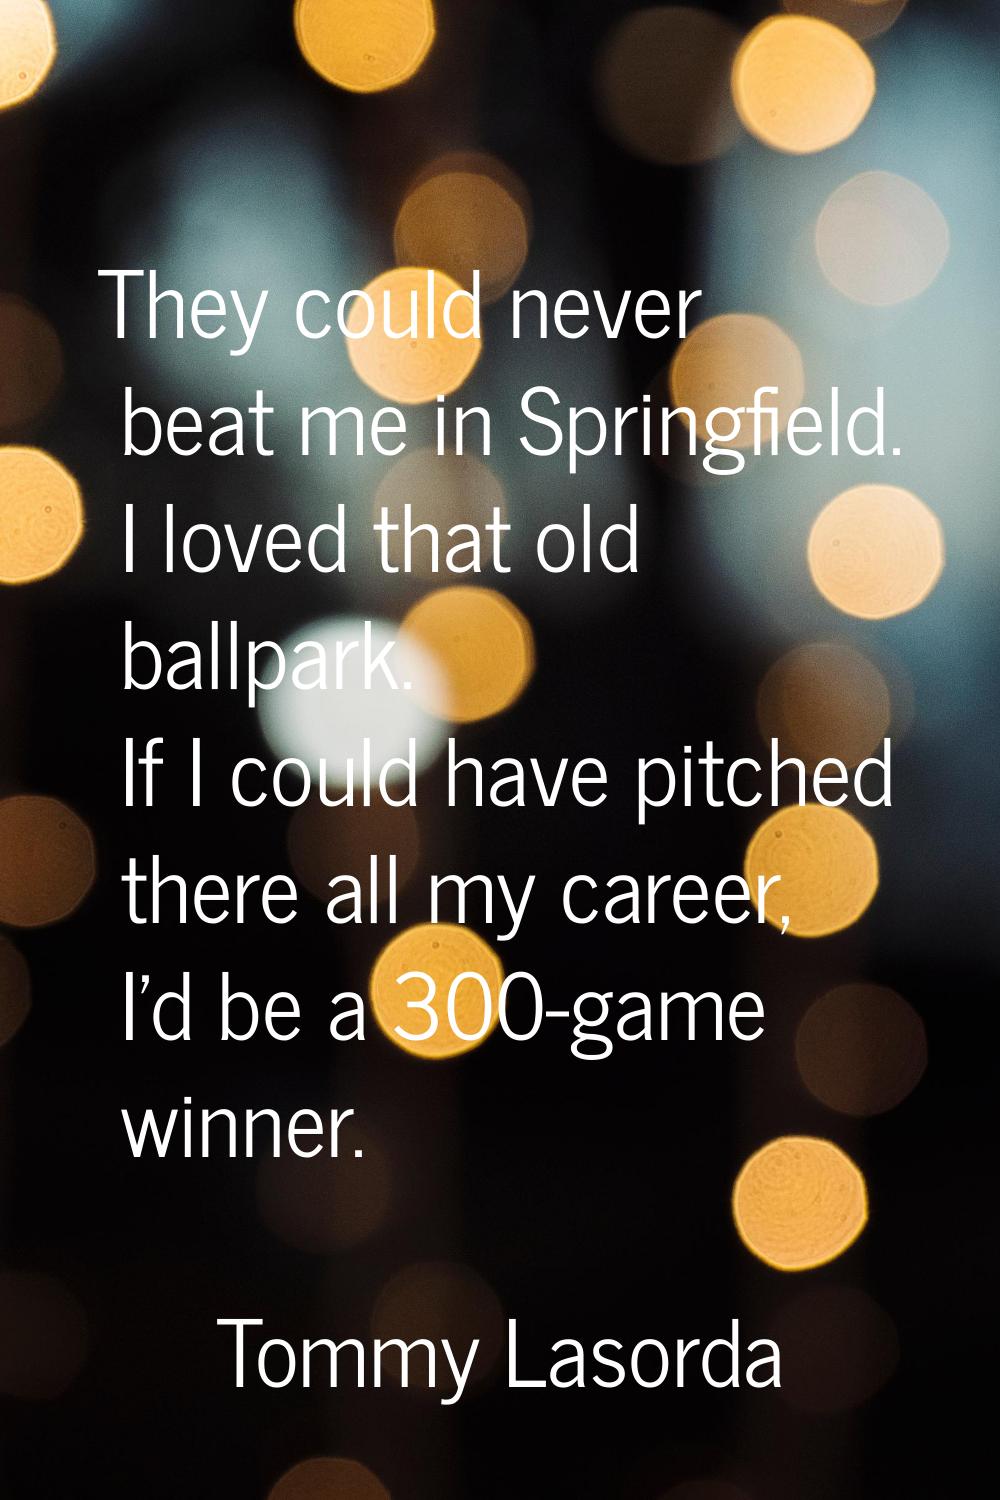 They could never beat me in Springfield. I loved that old ballpark. If I could have pitched there a